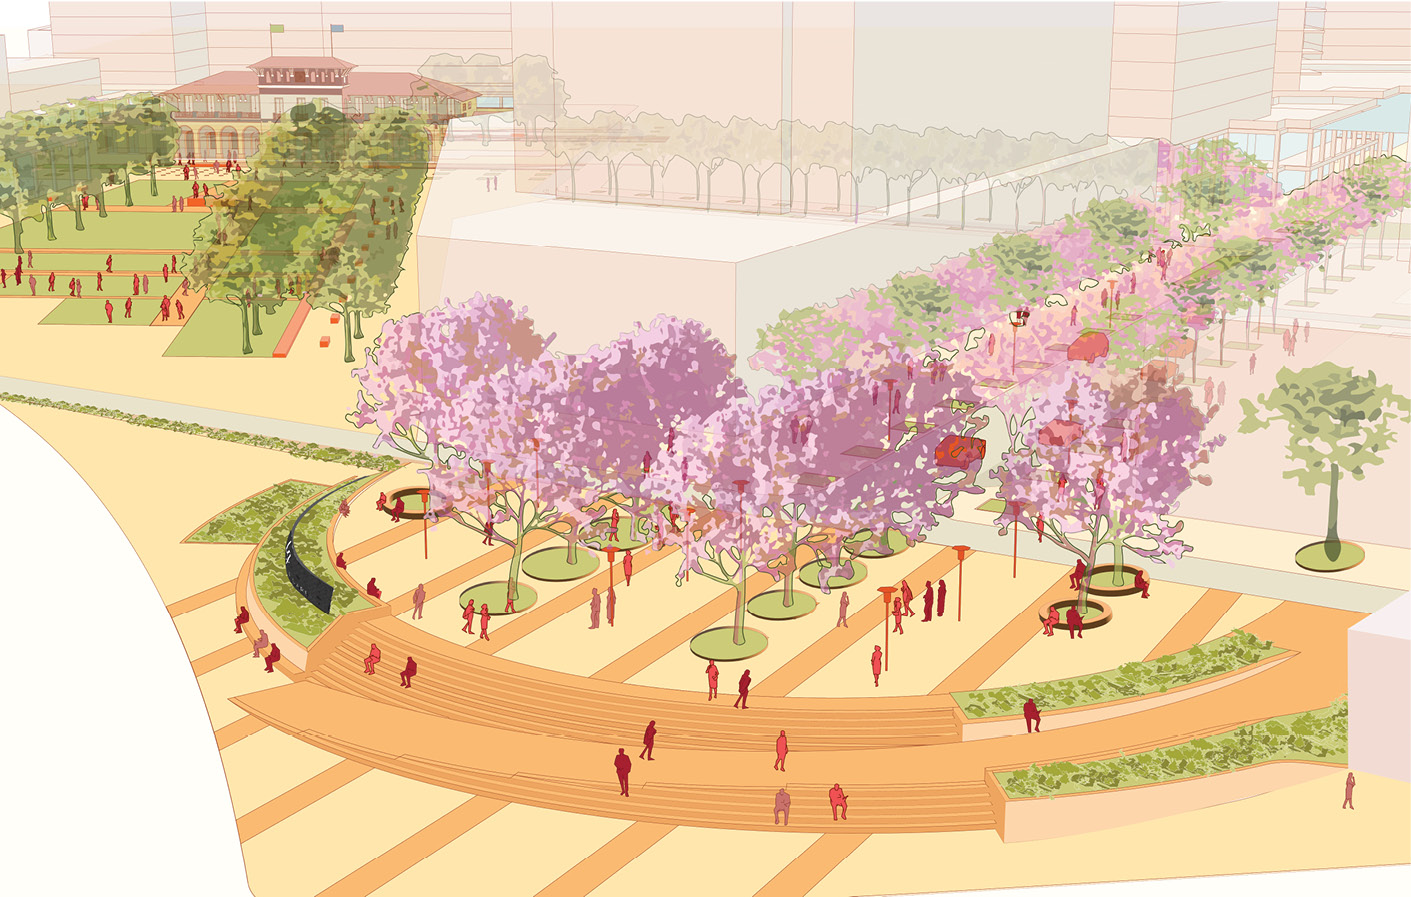 rendering of the arrival plaza featuring pedestrian traffic traversing the new and existing sidewalk